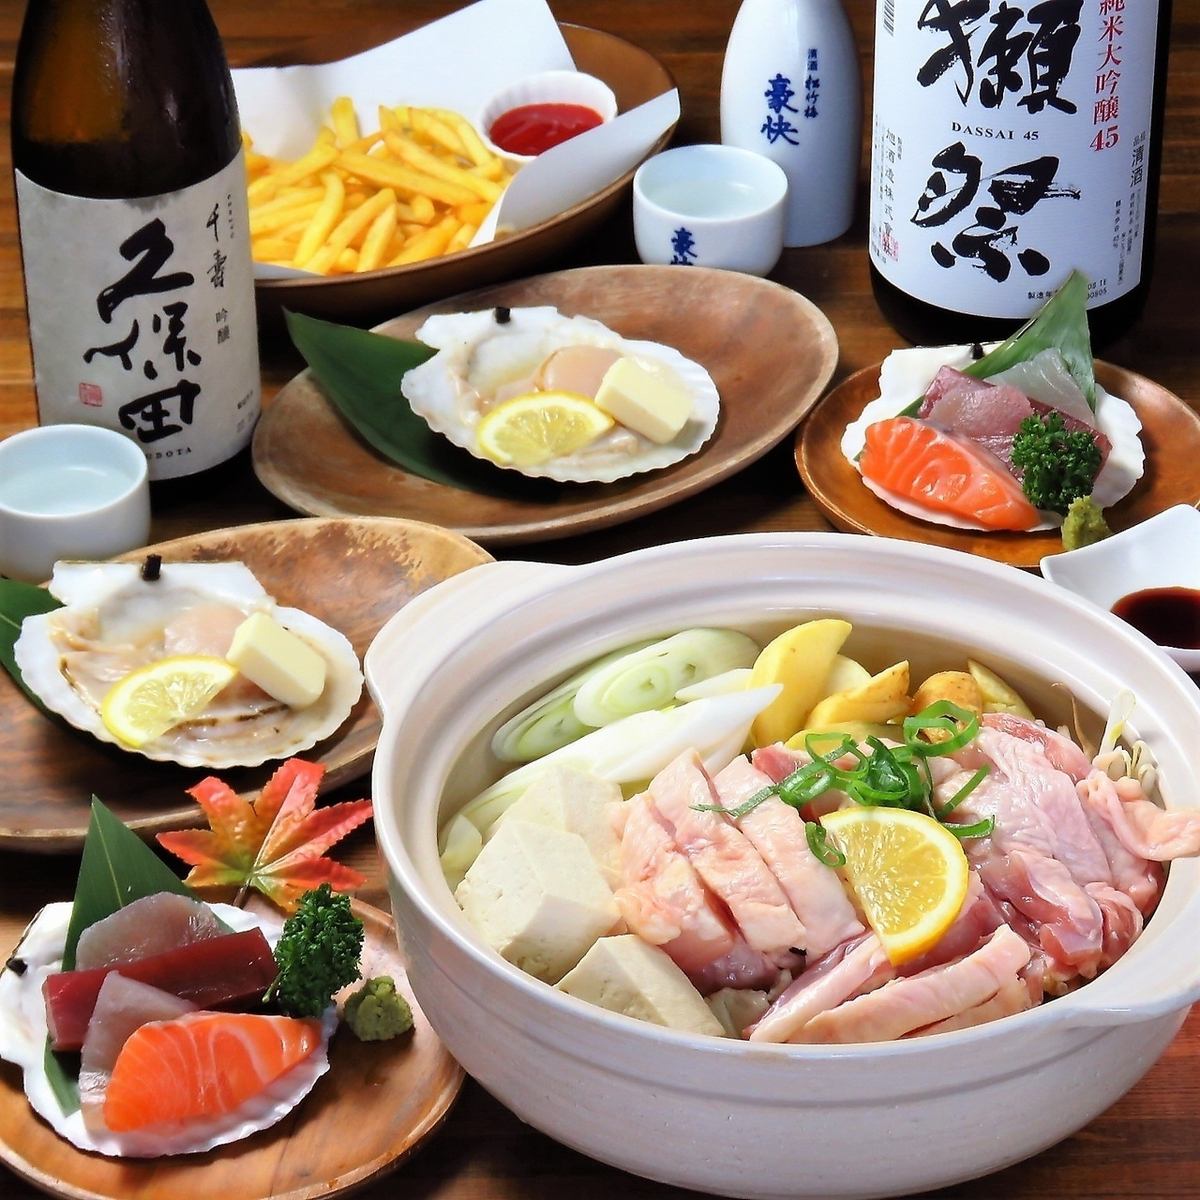 There is also a 3-hour all-you-can-drink, which is rare in other restaurants♪